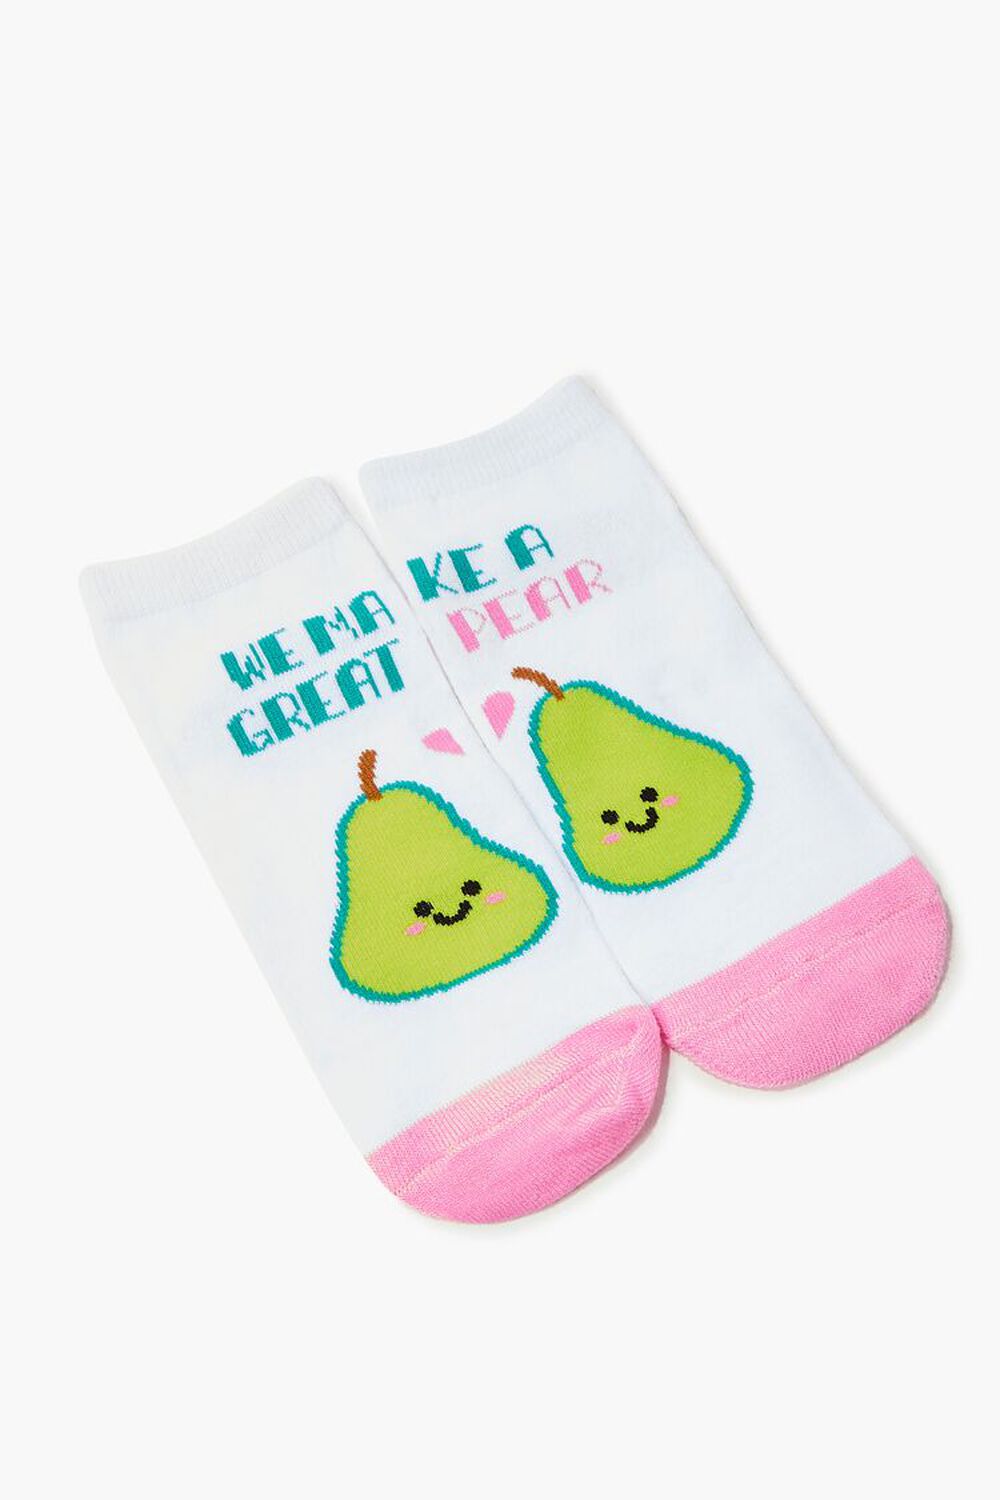 WHITE/MULTI Pear Graphic Ankle Socks, image 1